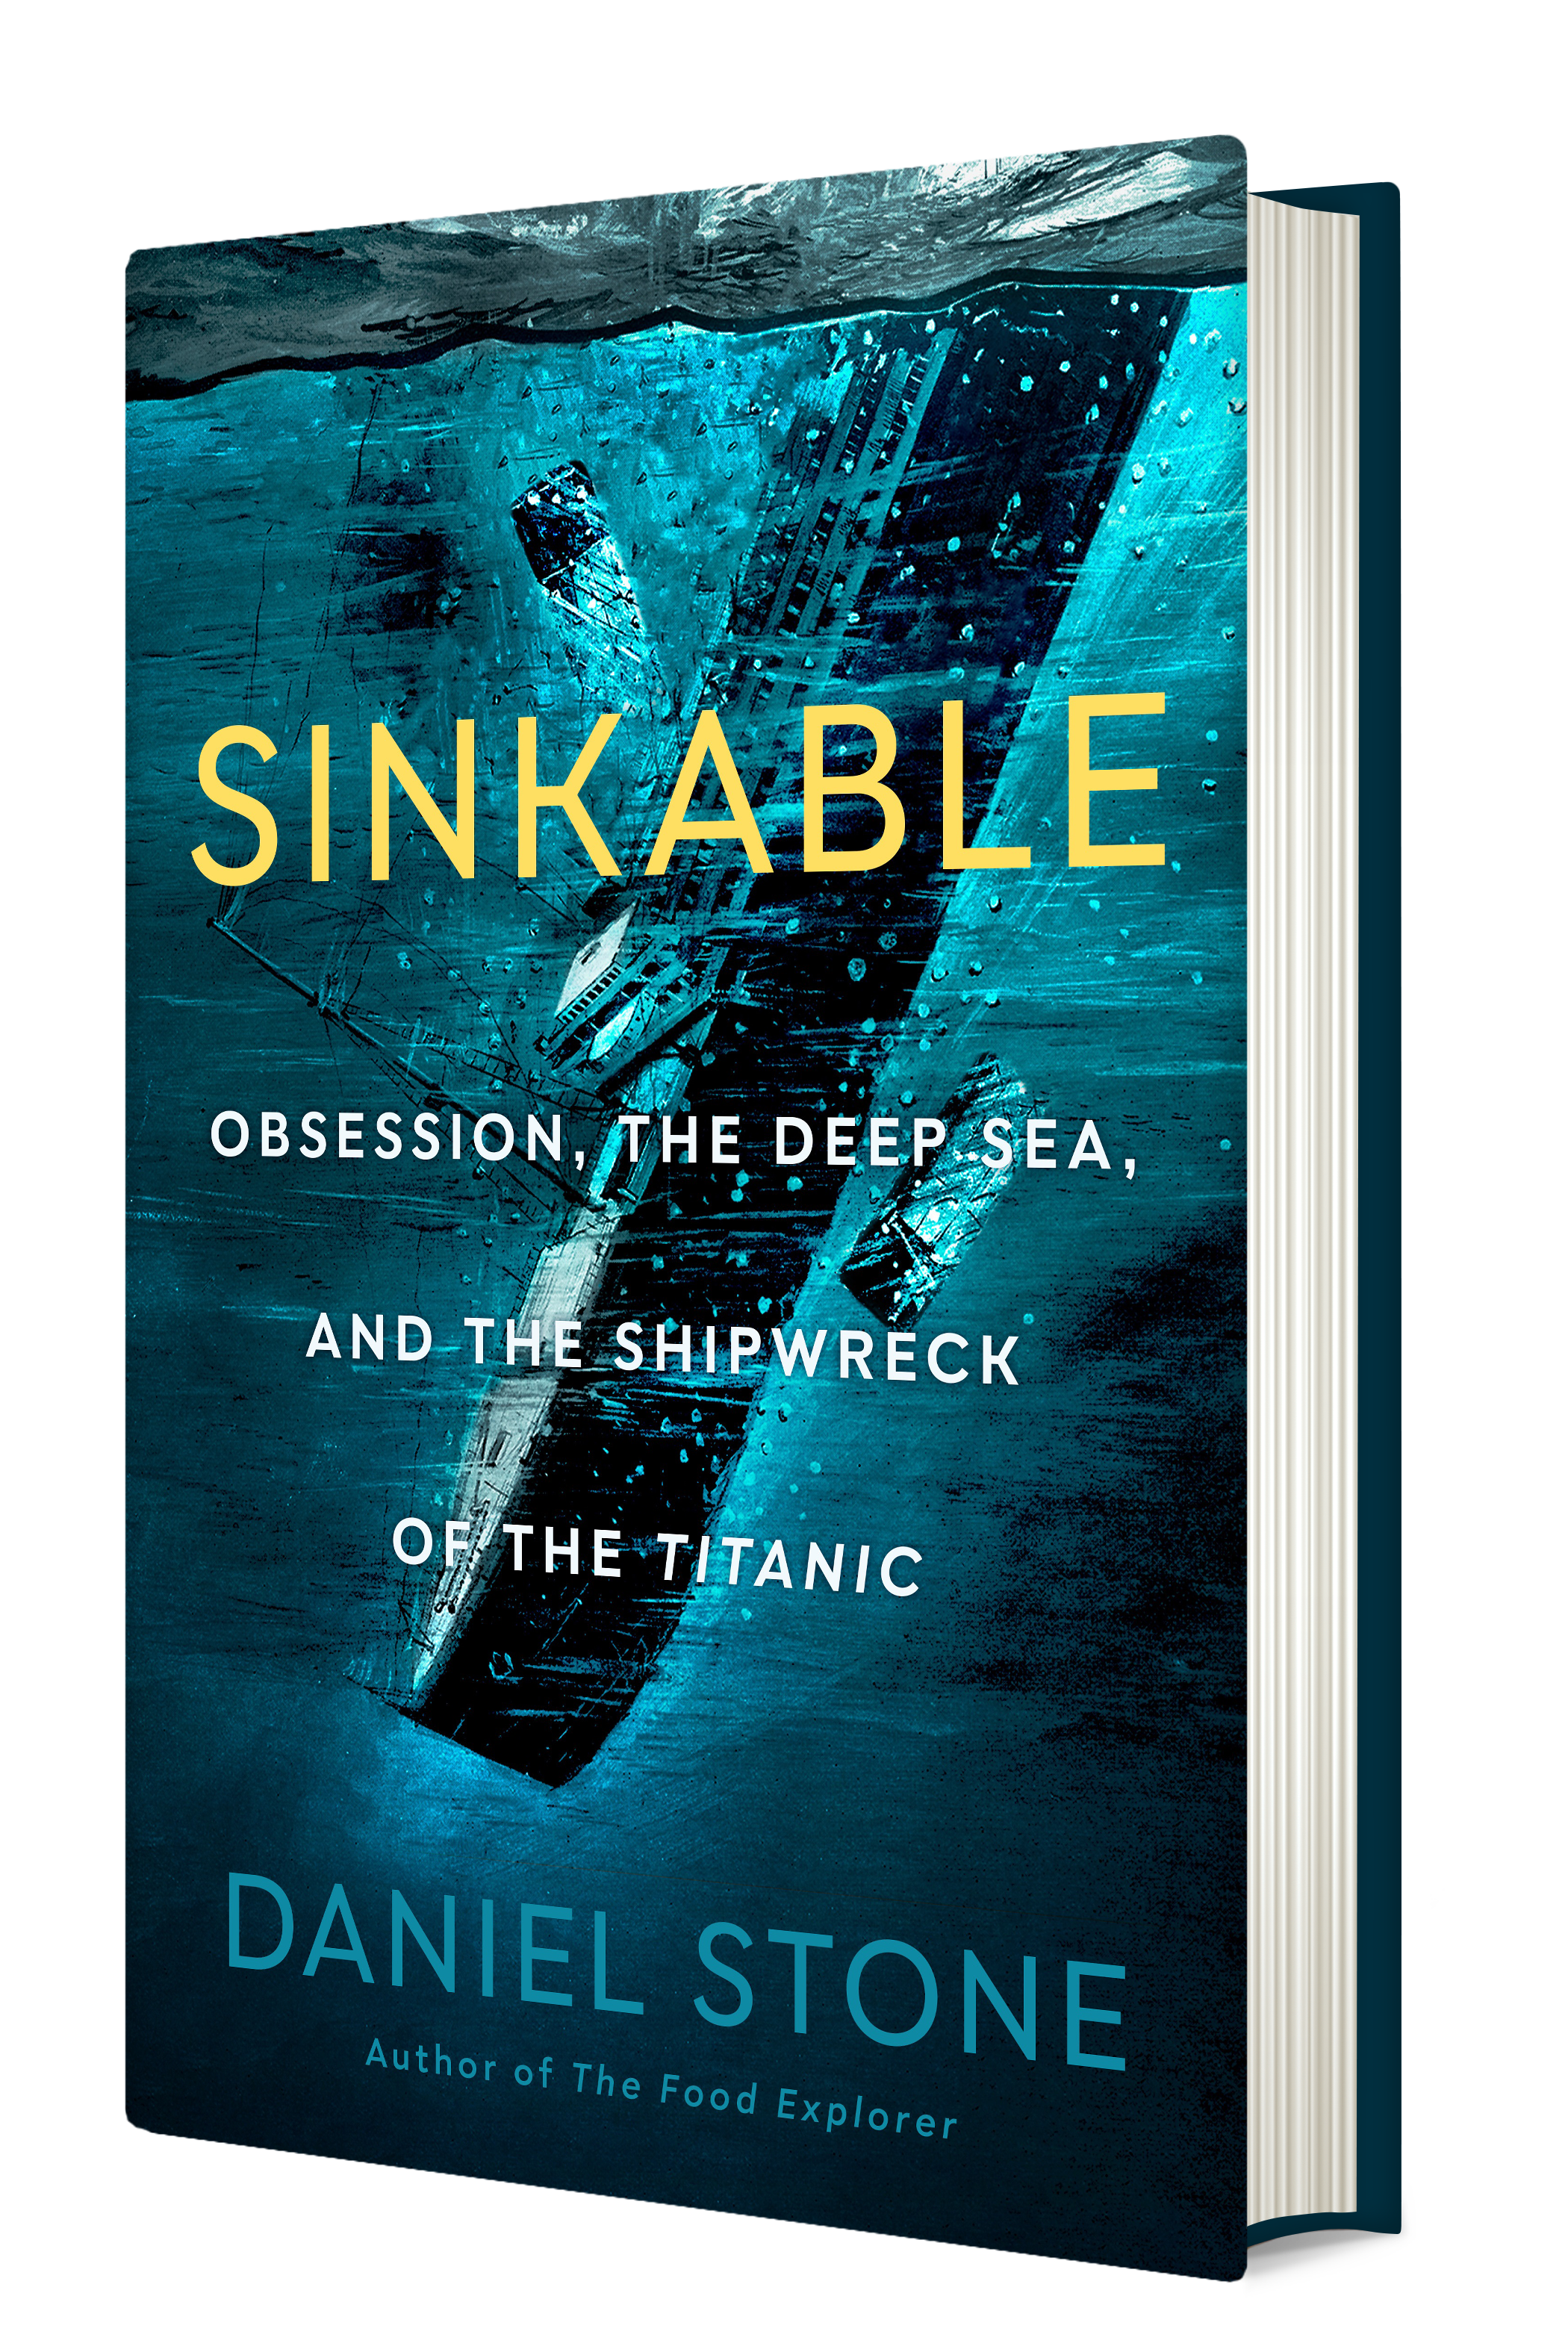 The book jacket of Sinkable